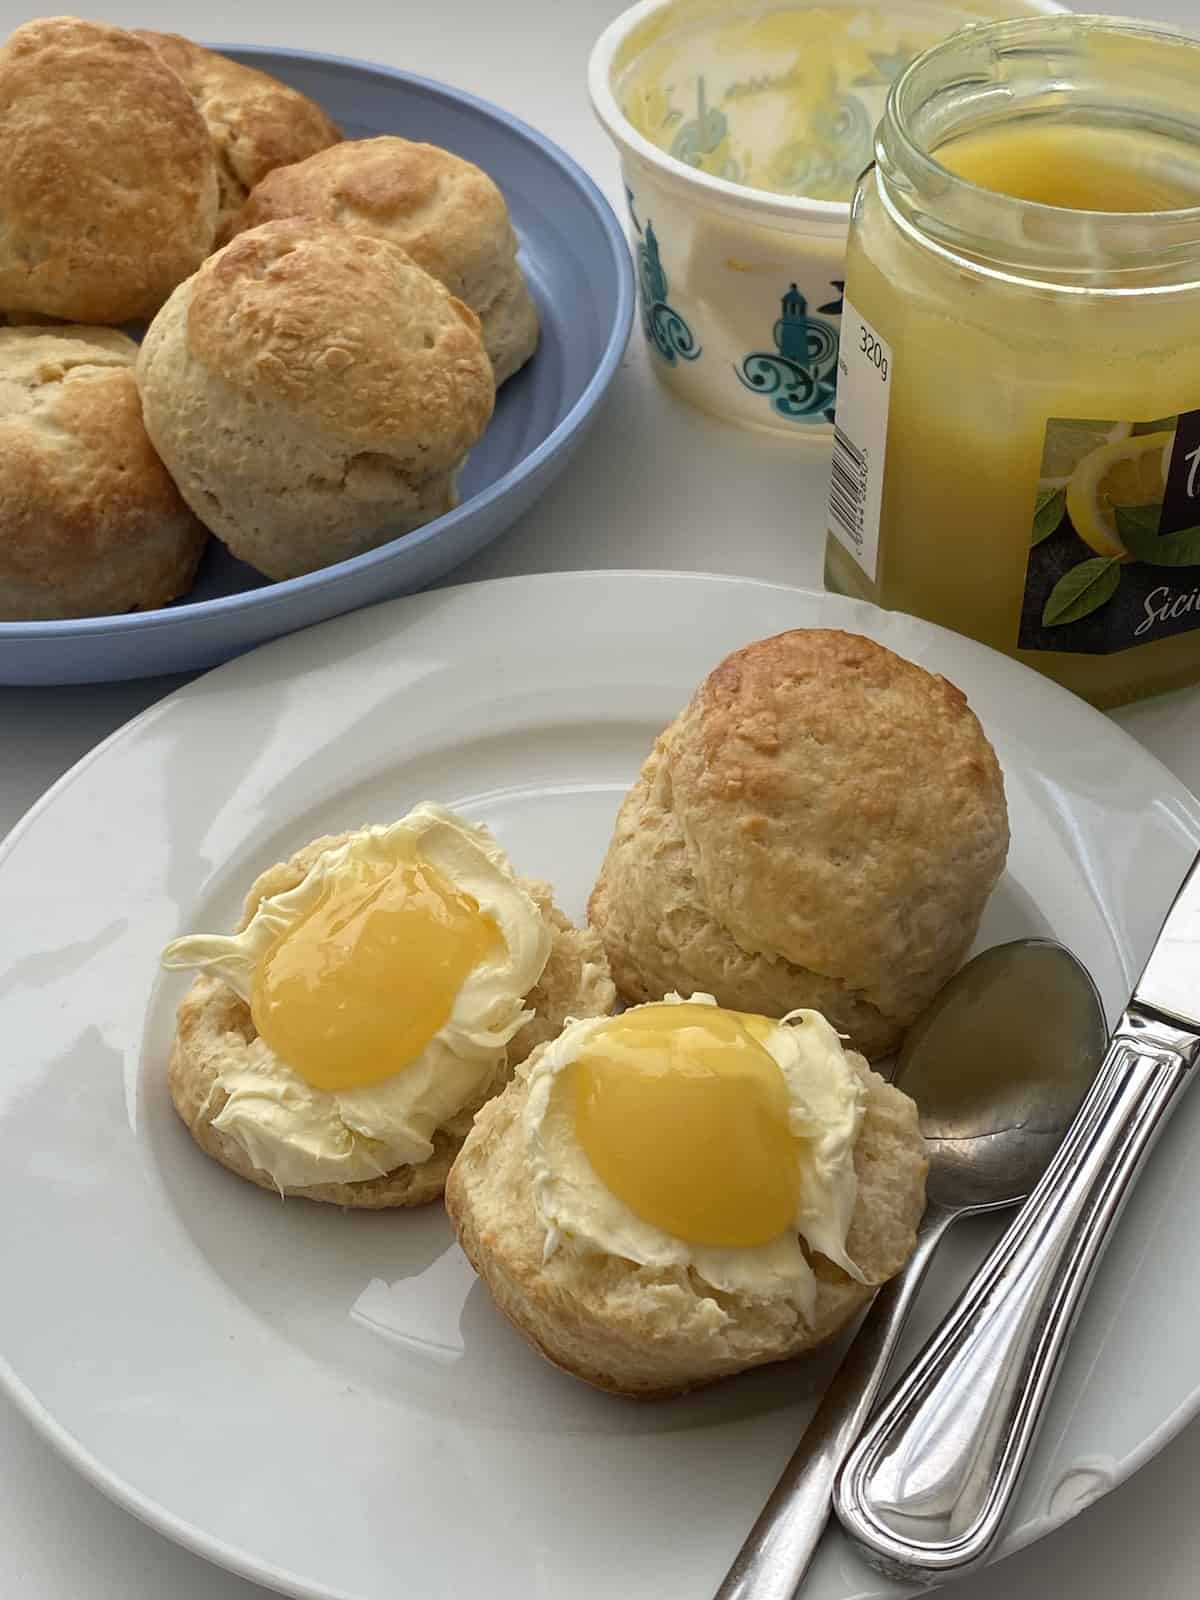 Plate of egg free scones with cream and Lemon Curd.